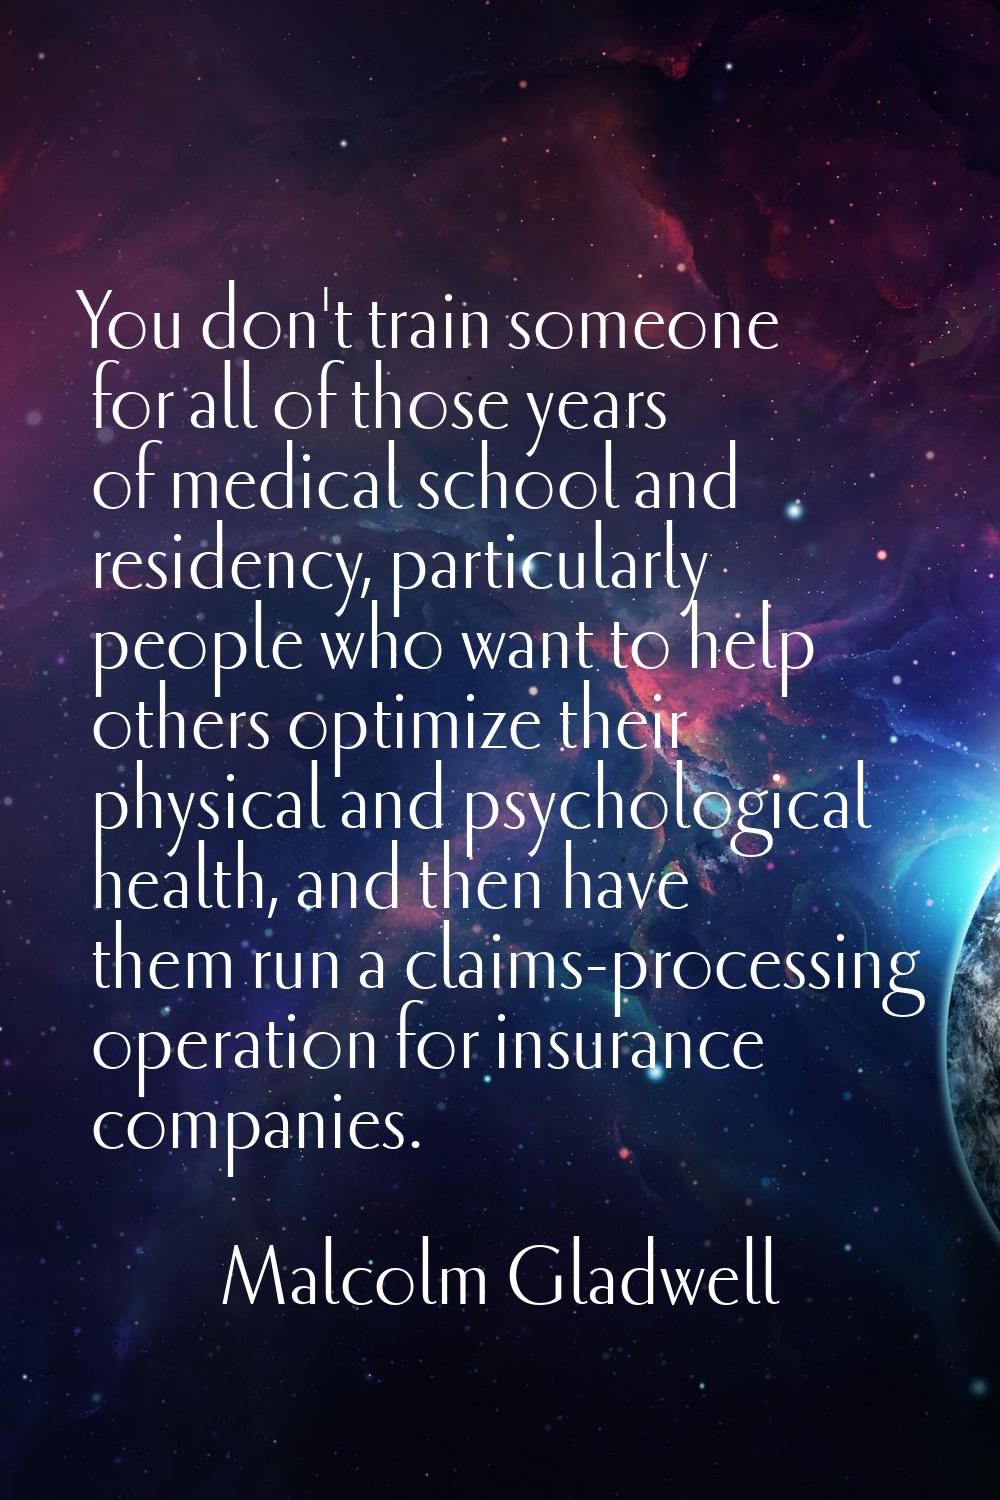 You don't train someone for all of those years of medical school and residency, particularly people